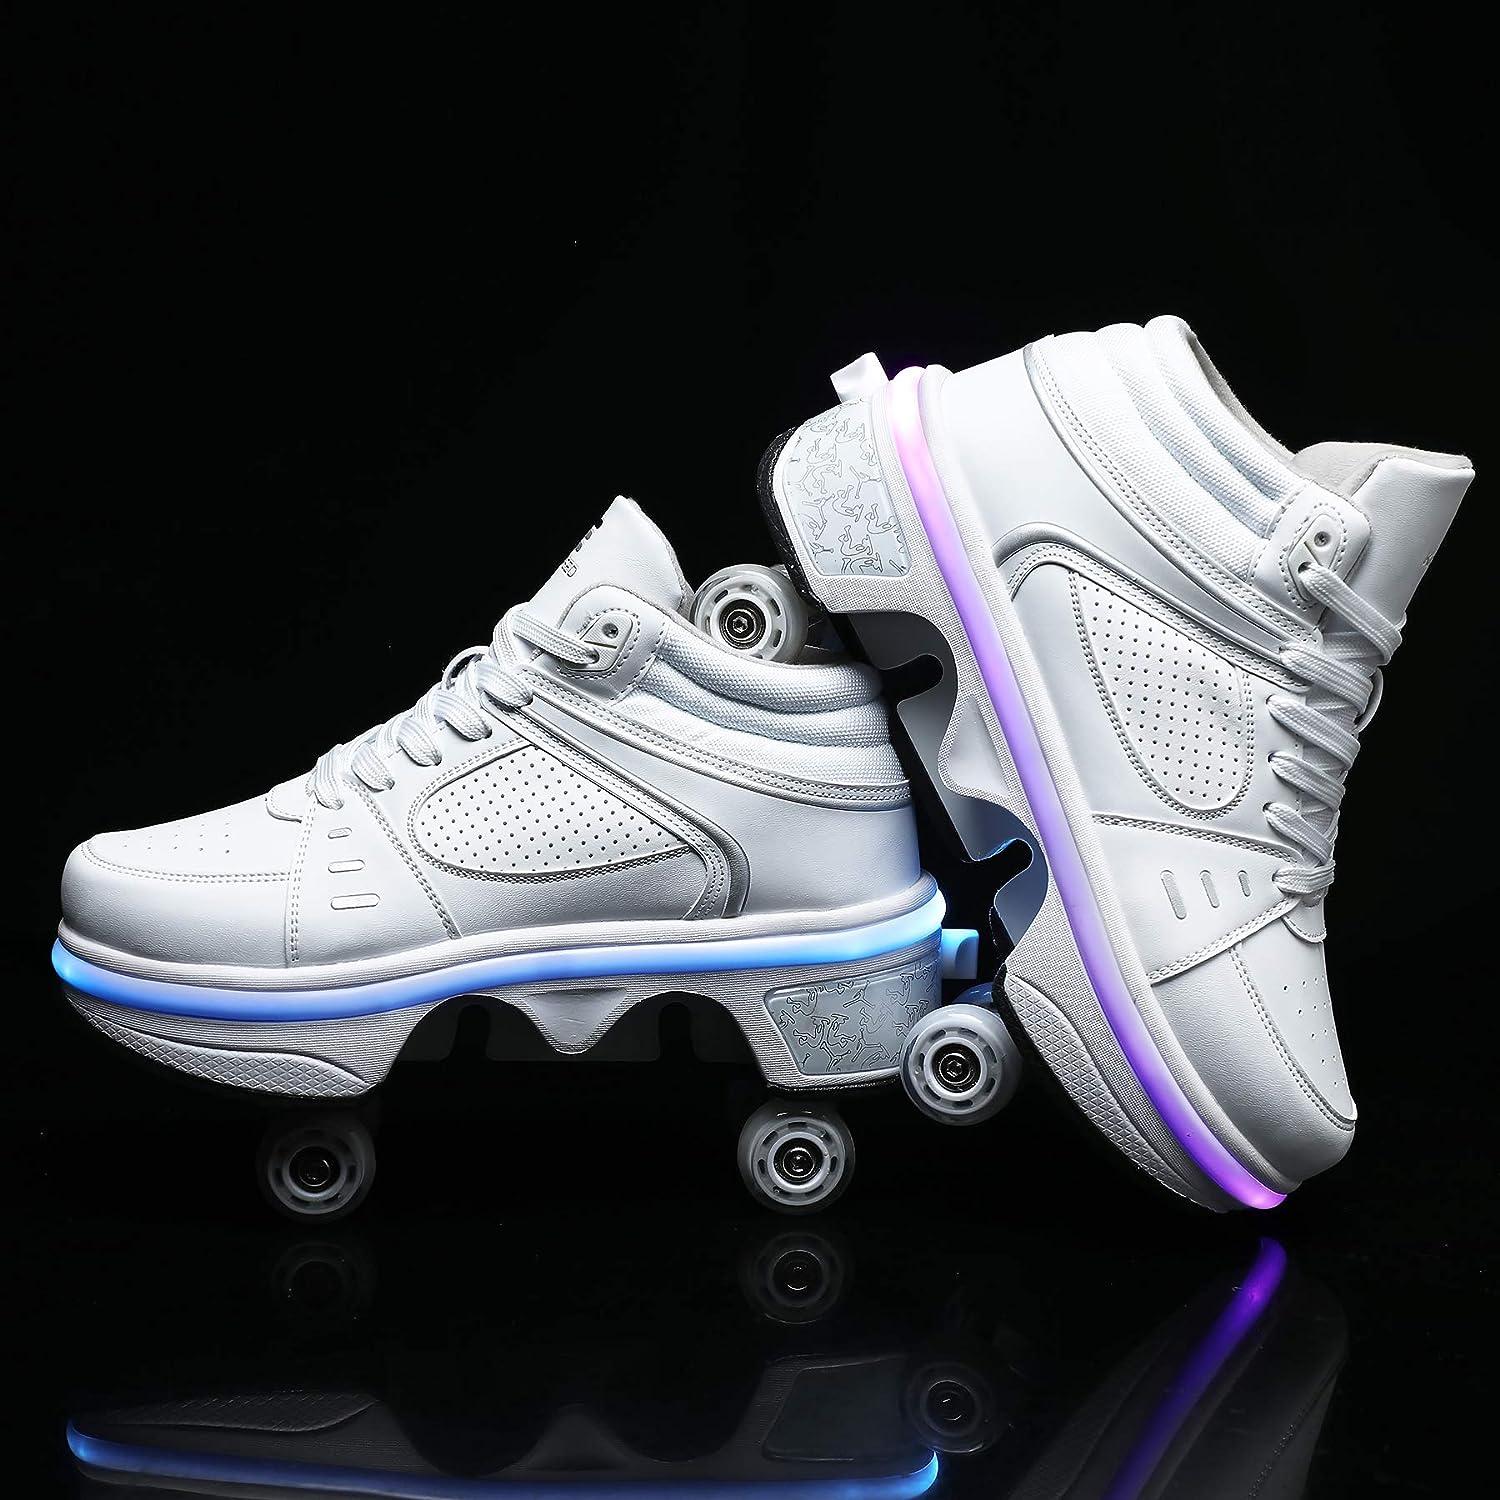  Pairobin Roller Skate Shoes - Sneakers Roller Shoes 2-in-1  Suitable for Outdoor Sports Skating Invisible Roller Skates The Best Choice  for Building Confidence Style : Sports & Outdoors